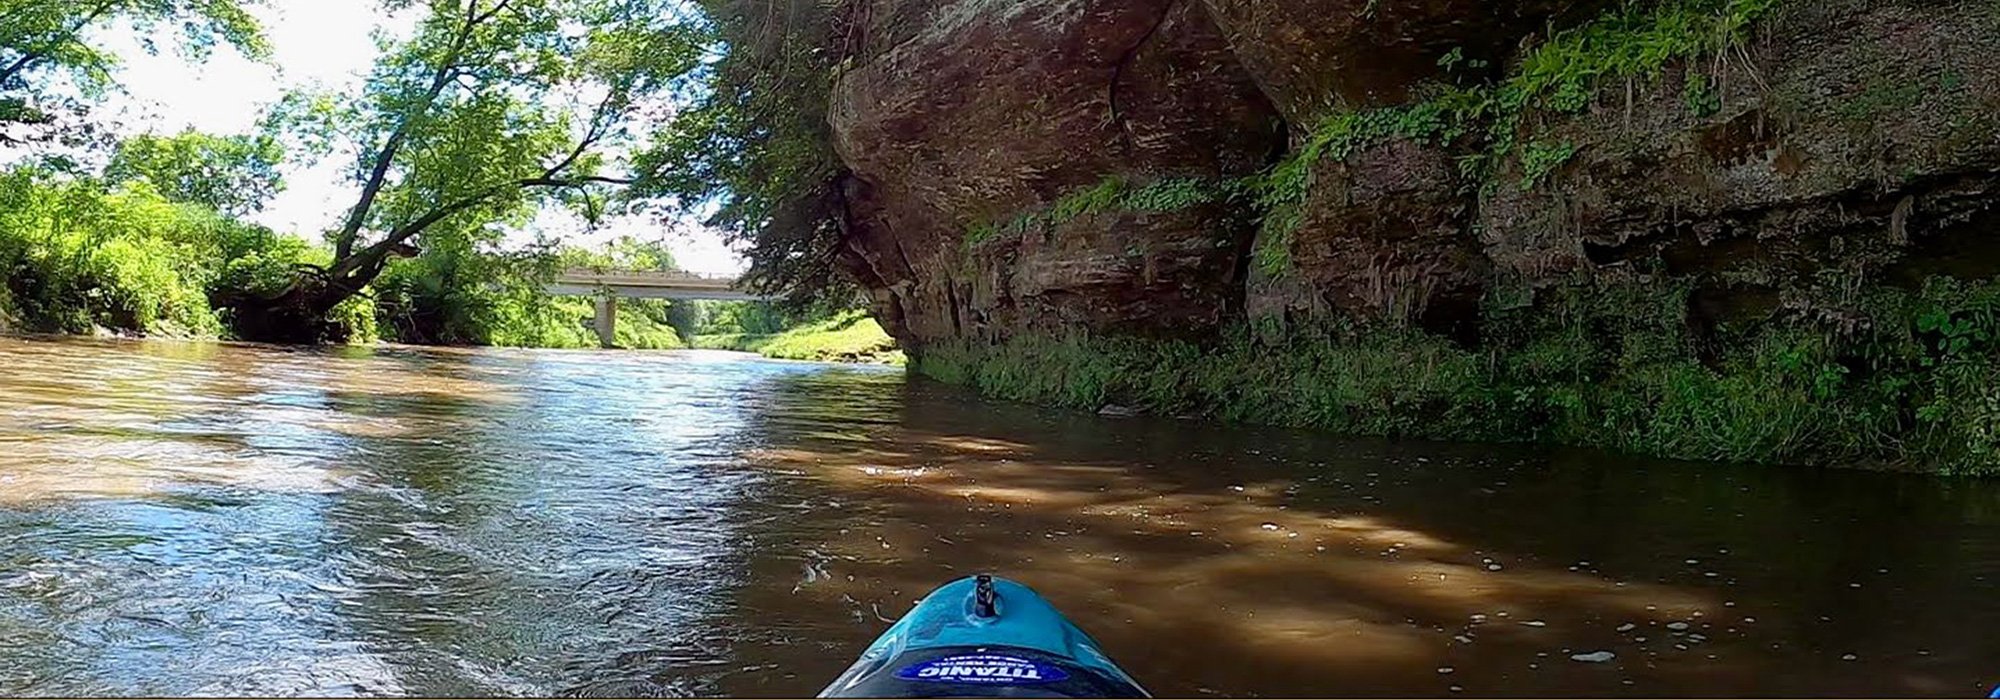 Canoeing, Kayak & Tubing Rentals on the Kickapoo River by Ontario, WI